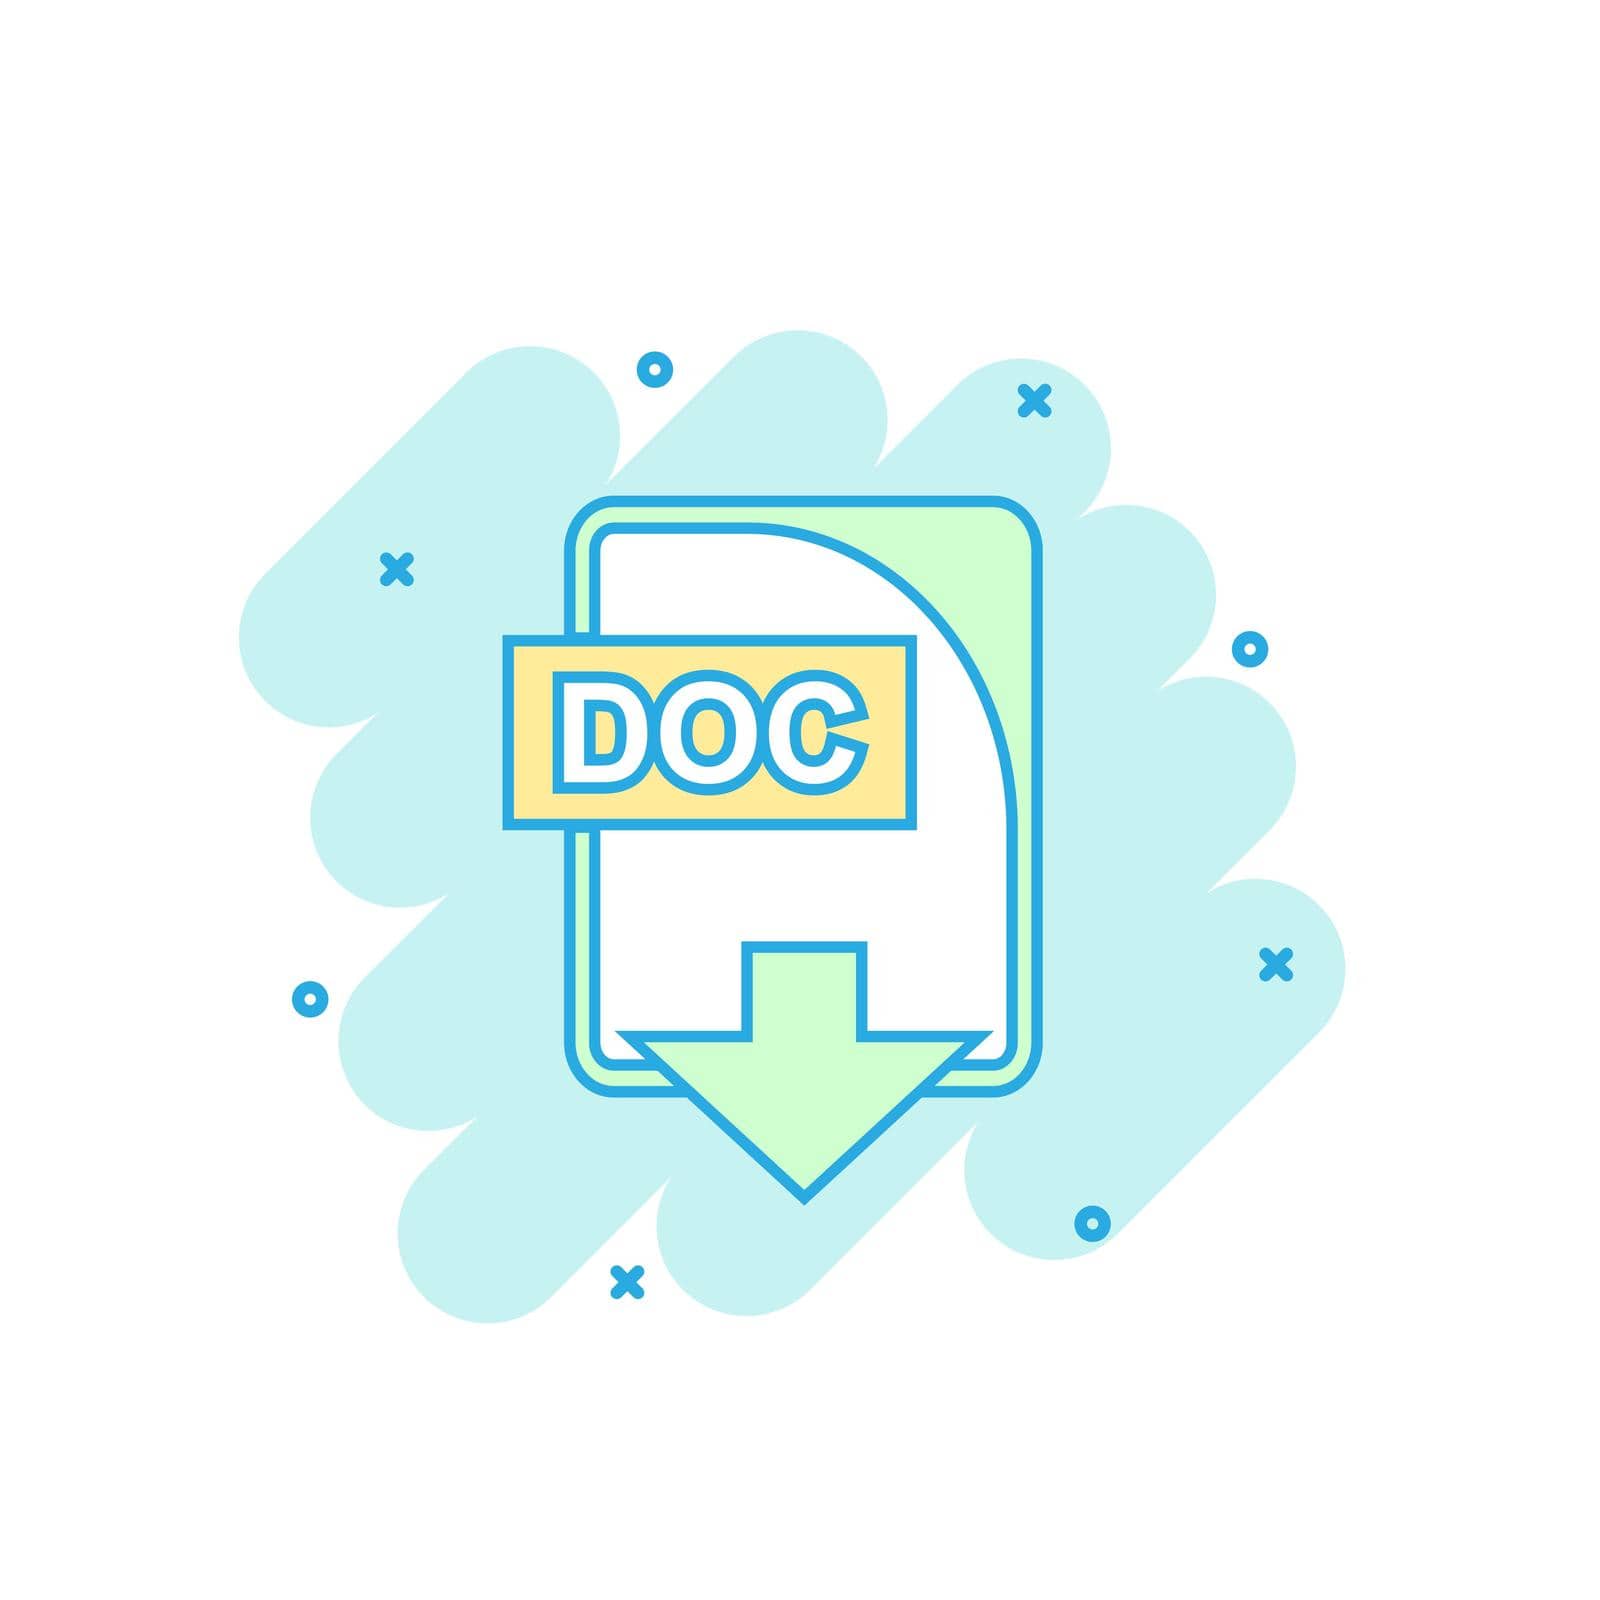 Cartoon colored DOC file icon in comic style. Doc download illustration pictogram. Document splash business concept. by LysenkoA